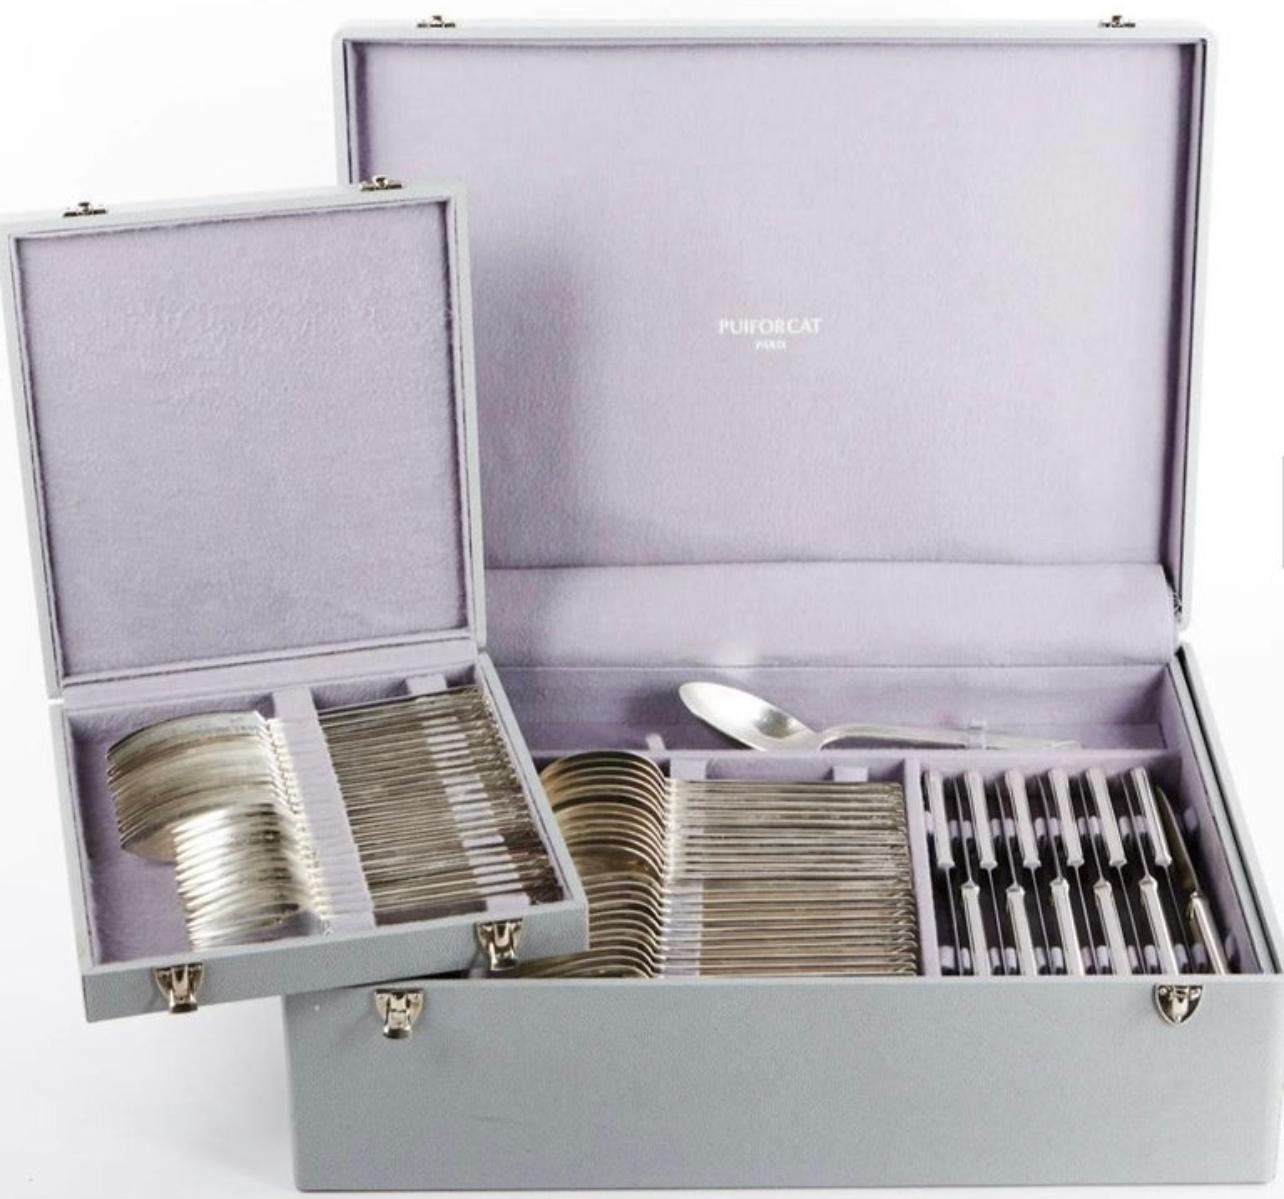 Puiforcat, Cutlery Flatware Set Aphea Solid Sterling Silver in Box, 110 Pieces 2